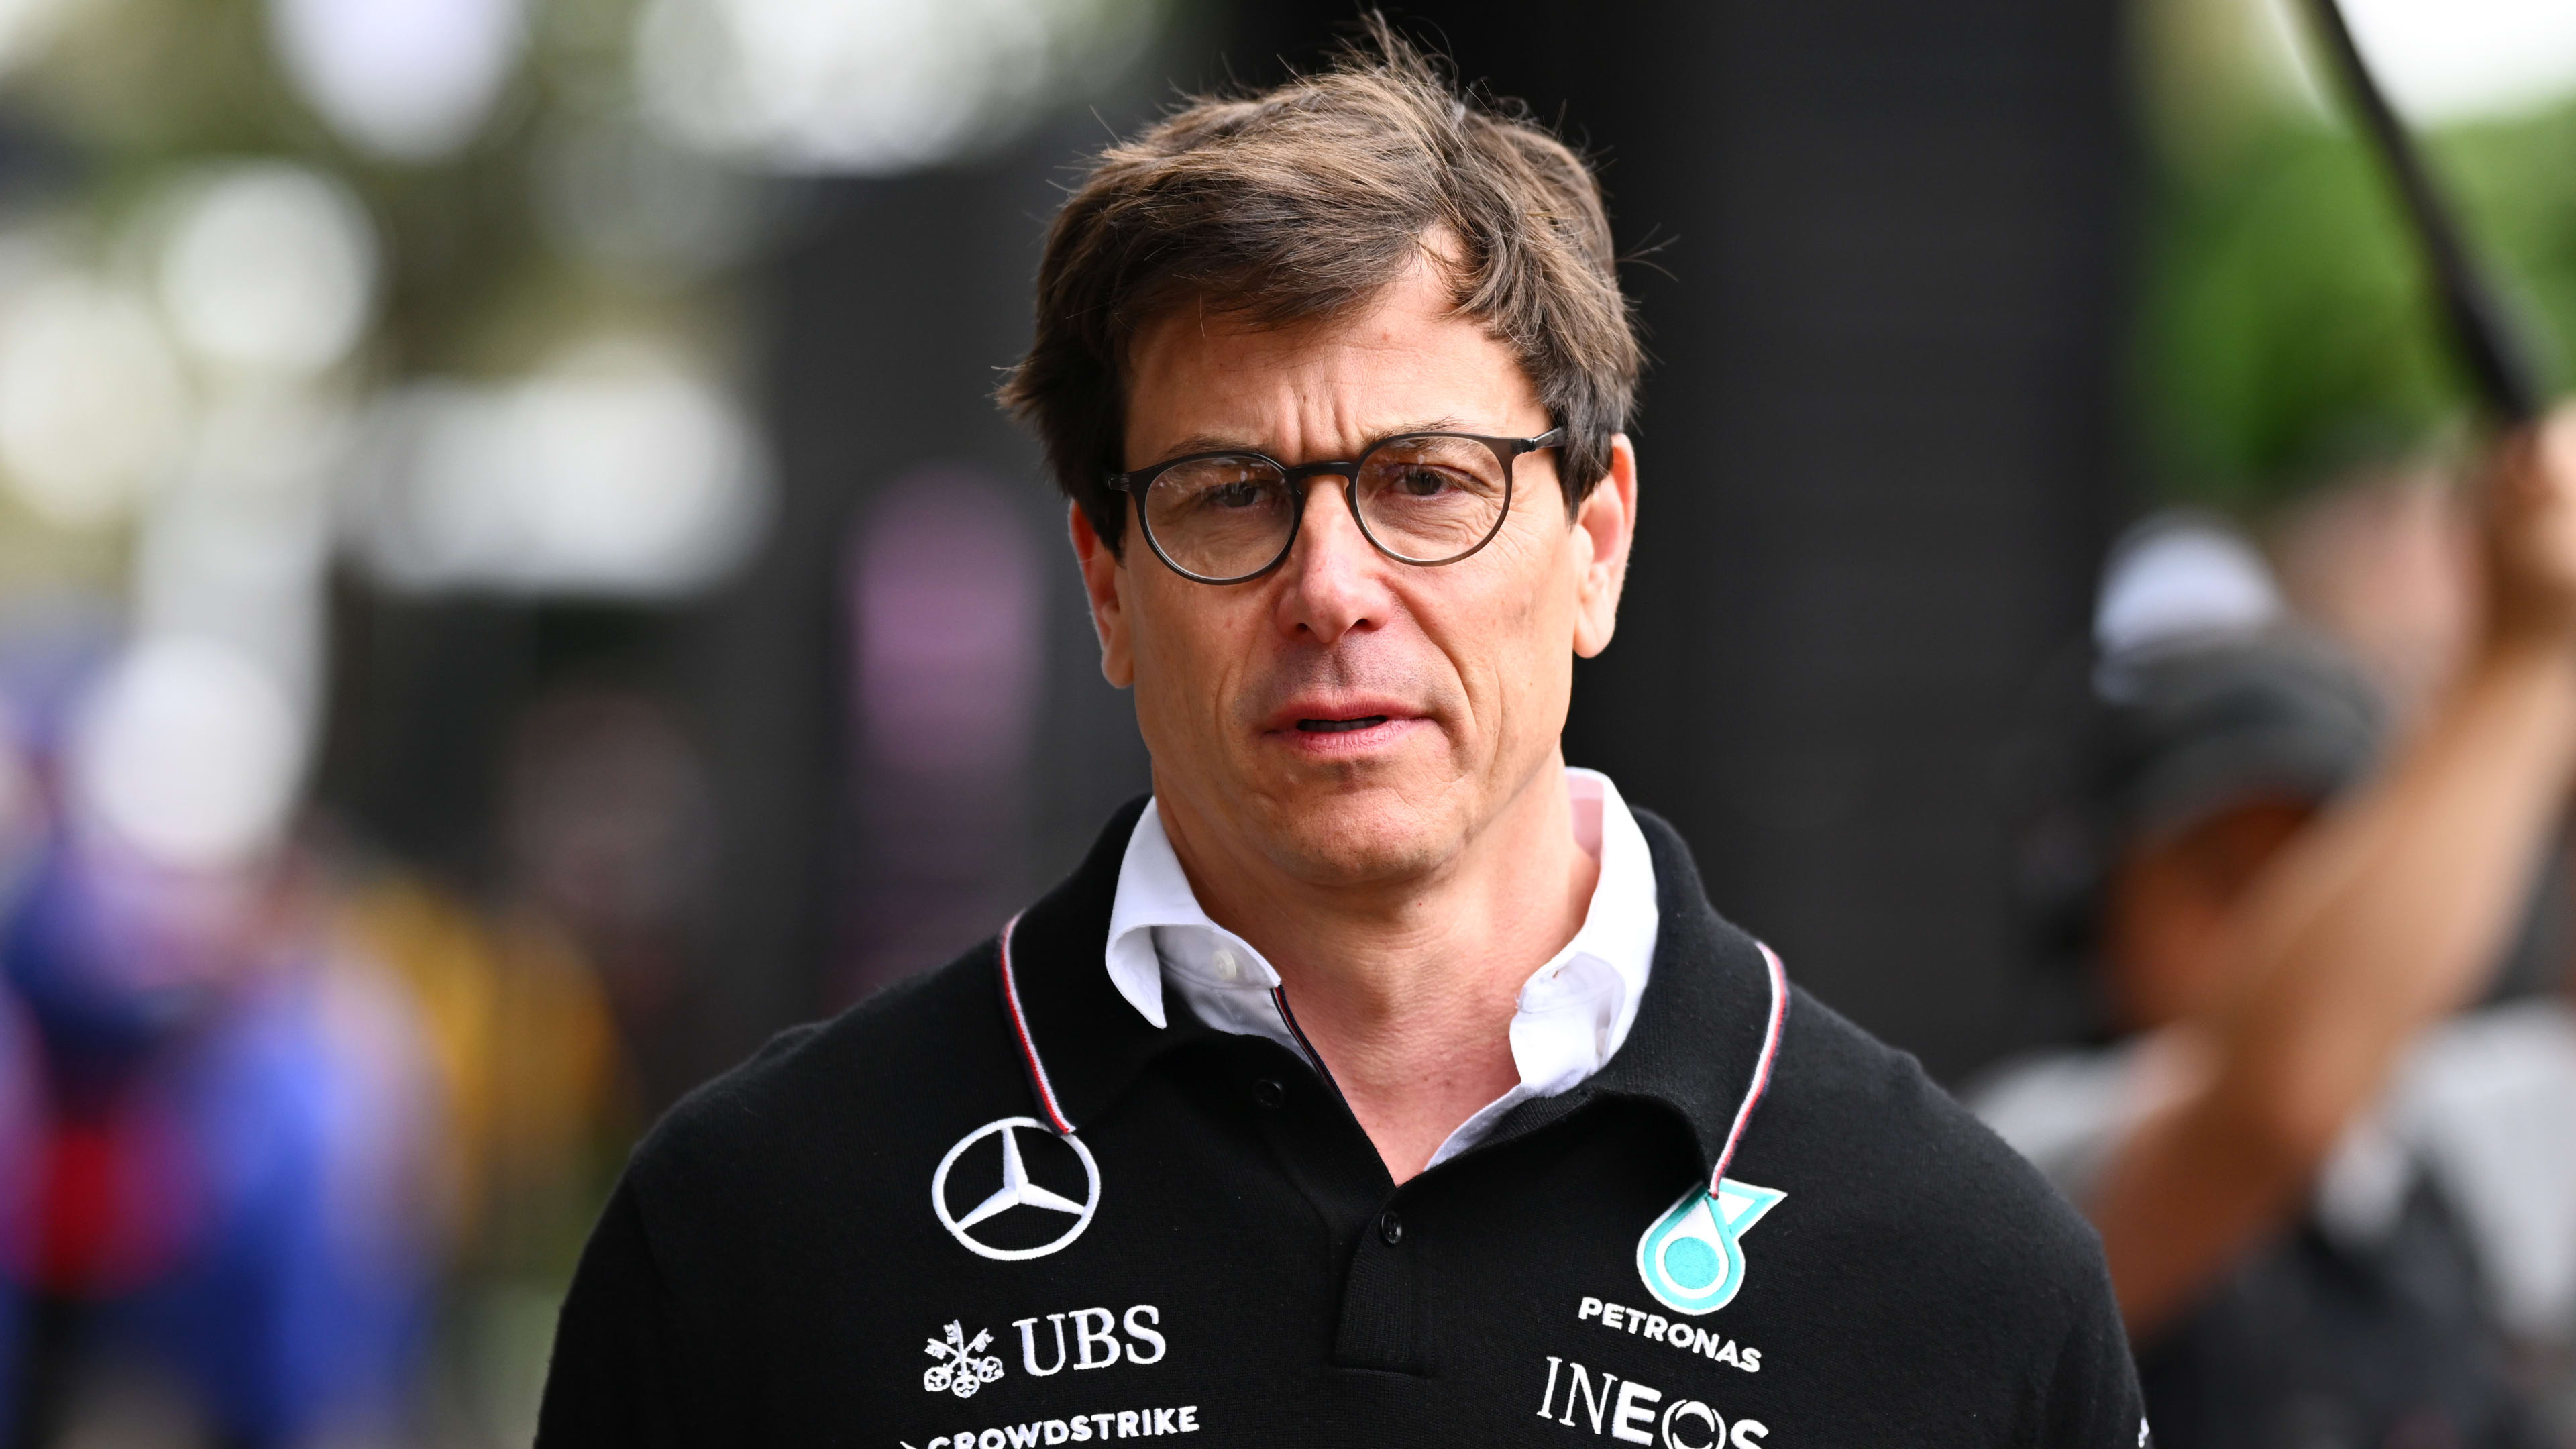 MELBOURNE, AUSTRALIA - MARCH 24: Mercedes GP Executive Director Toto Wolff walks in the Paddock